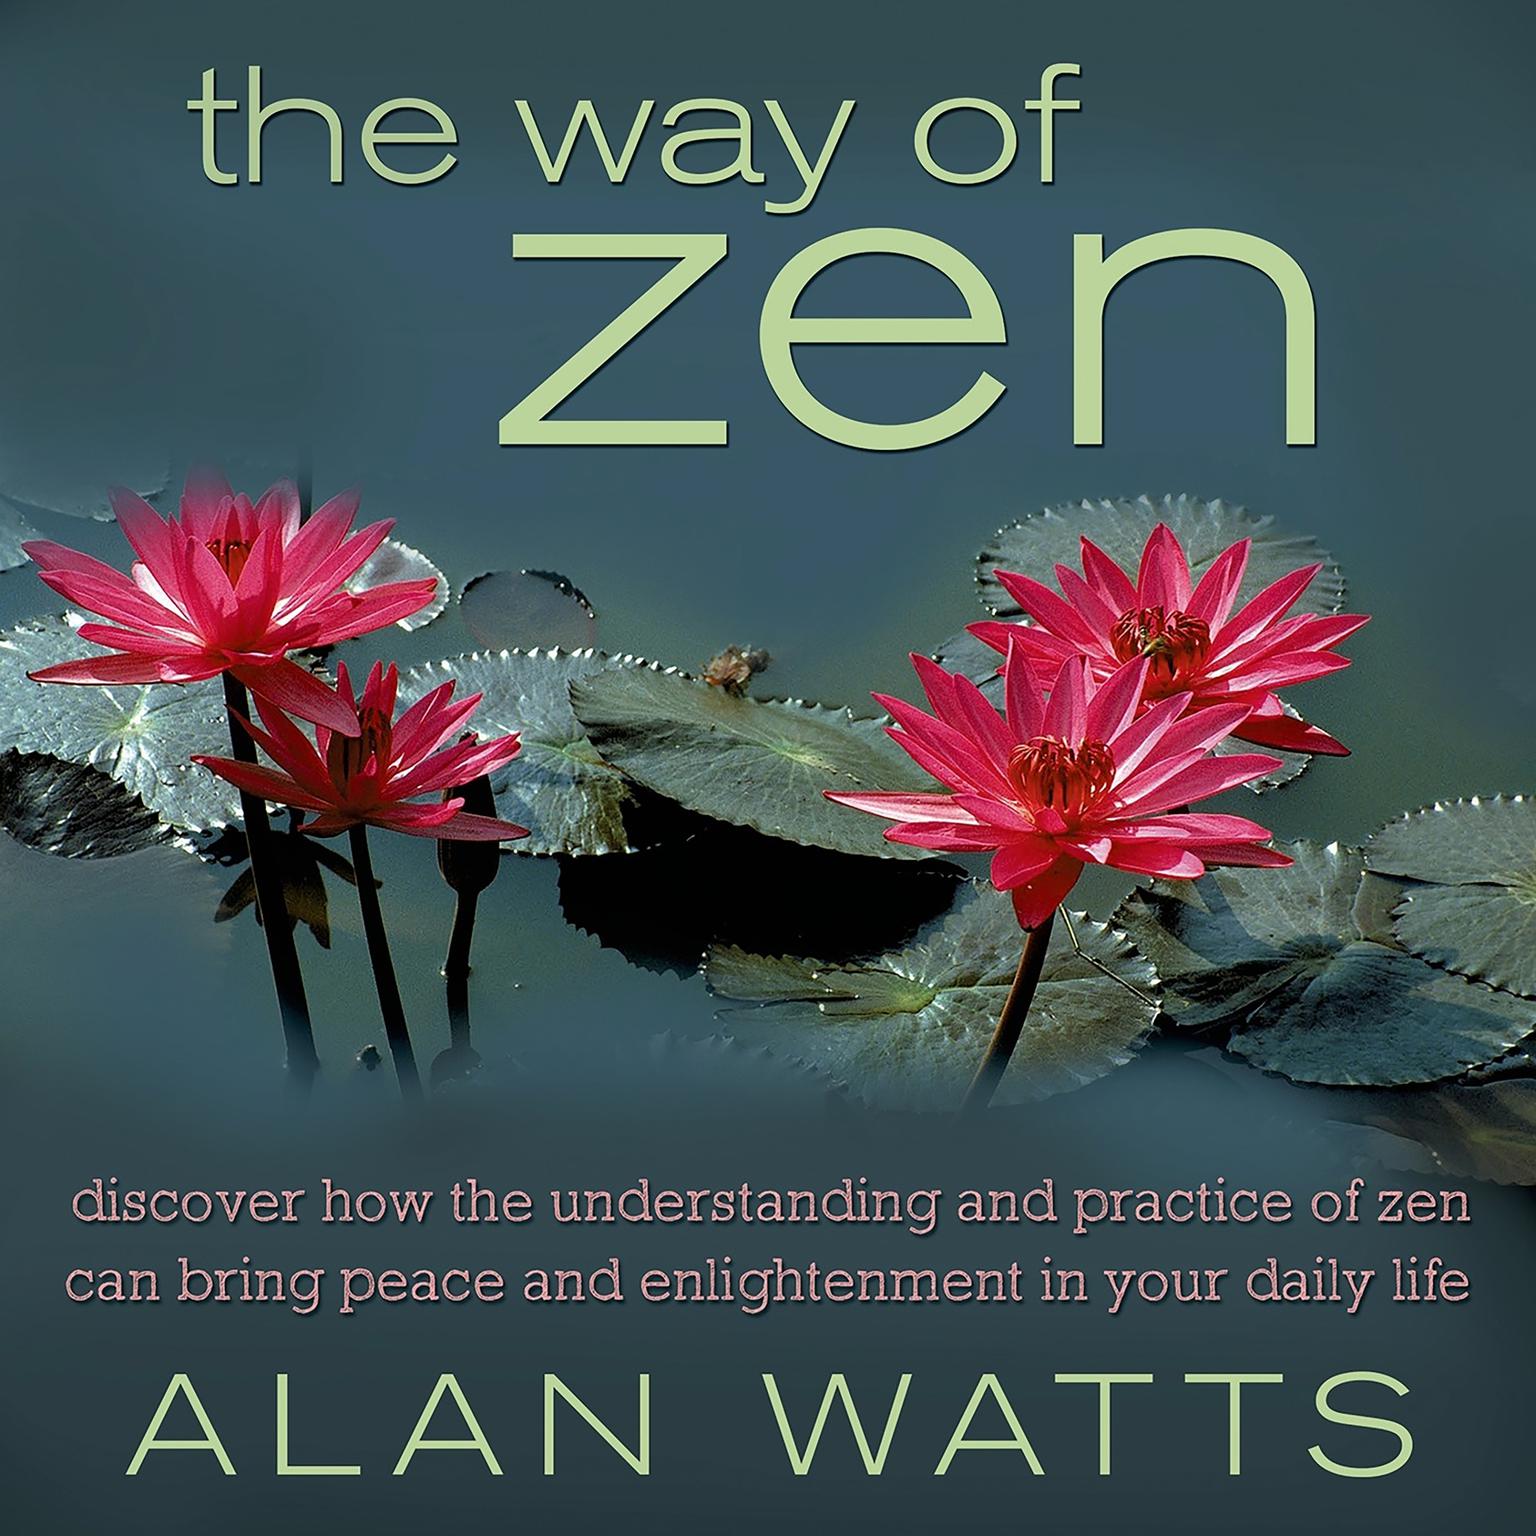 The Way of Zen: Discover How the Understanding and Practice of Zen Can Bring Peace and Enlightenment Into Your Daily Life Audiobook, by Alan Watts